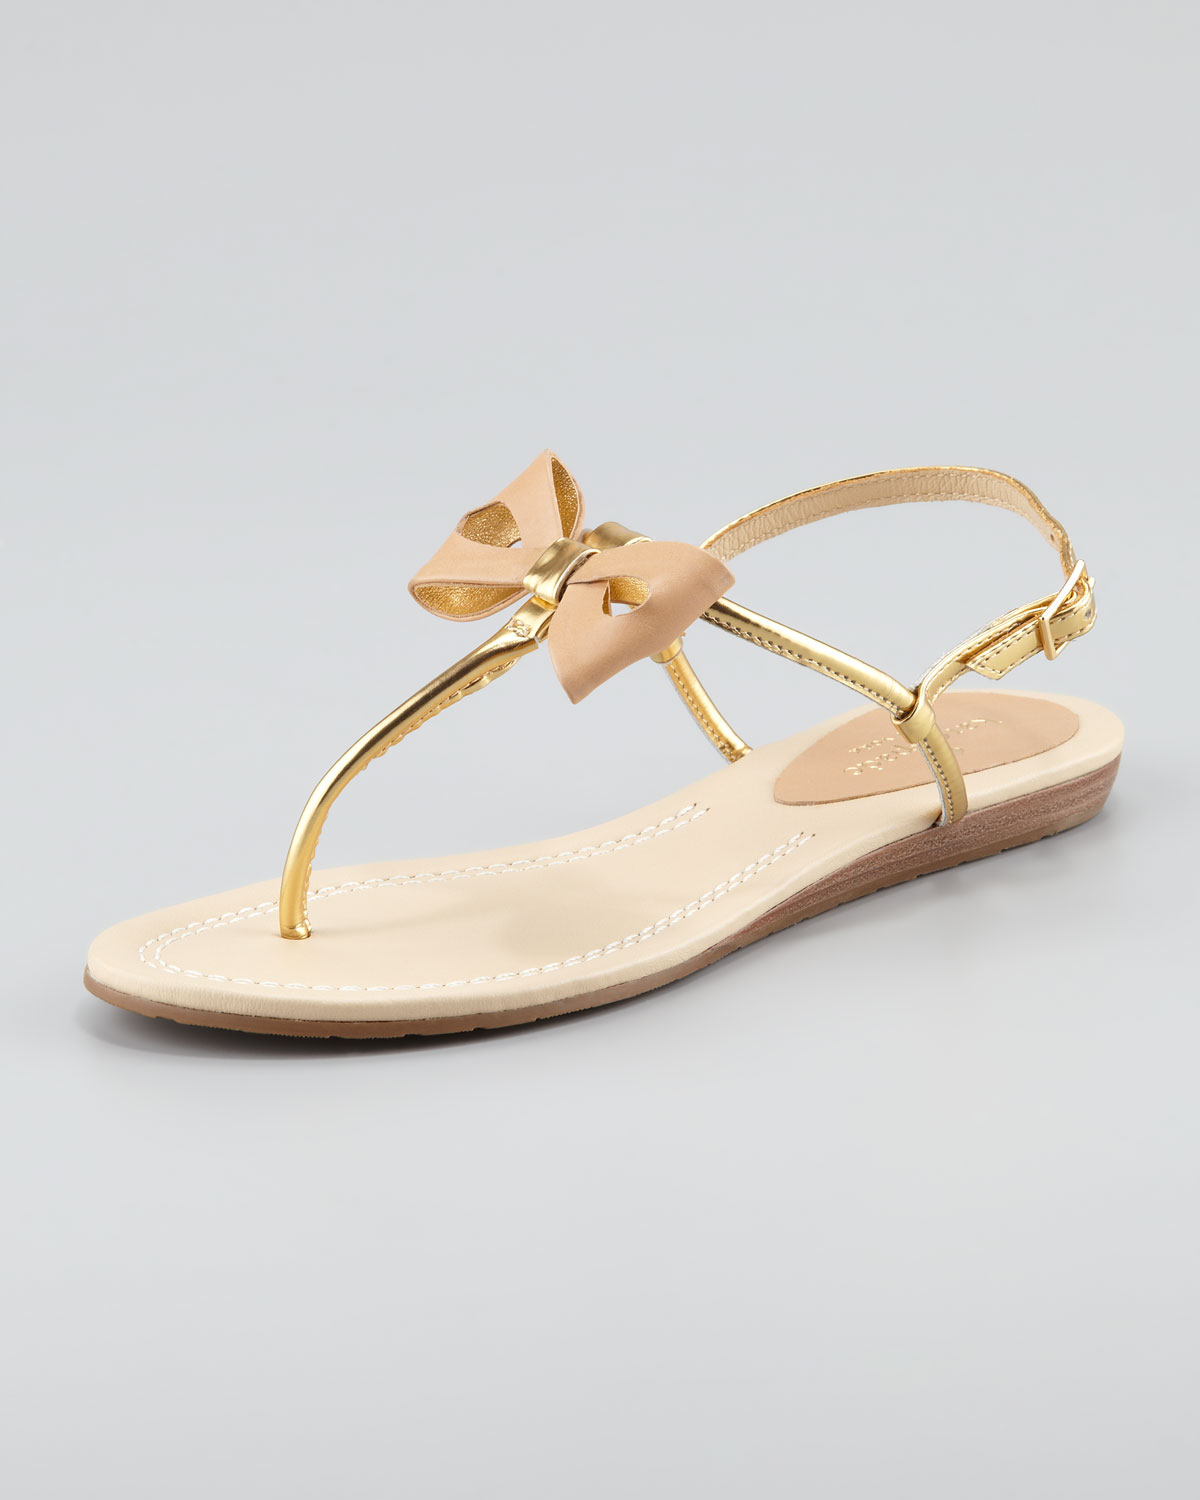 Kate Spade Trendy Bow Thong Sandal in Gold/Natural (Natural) - Lyst